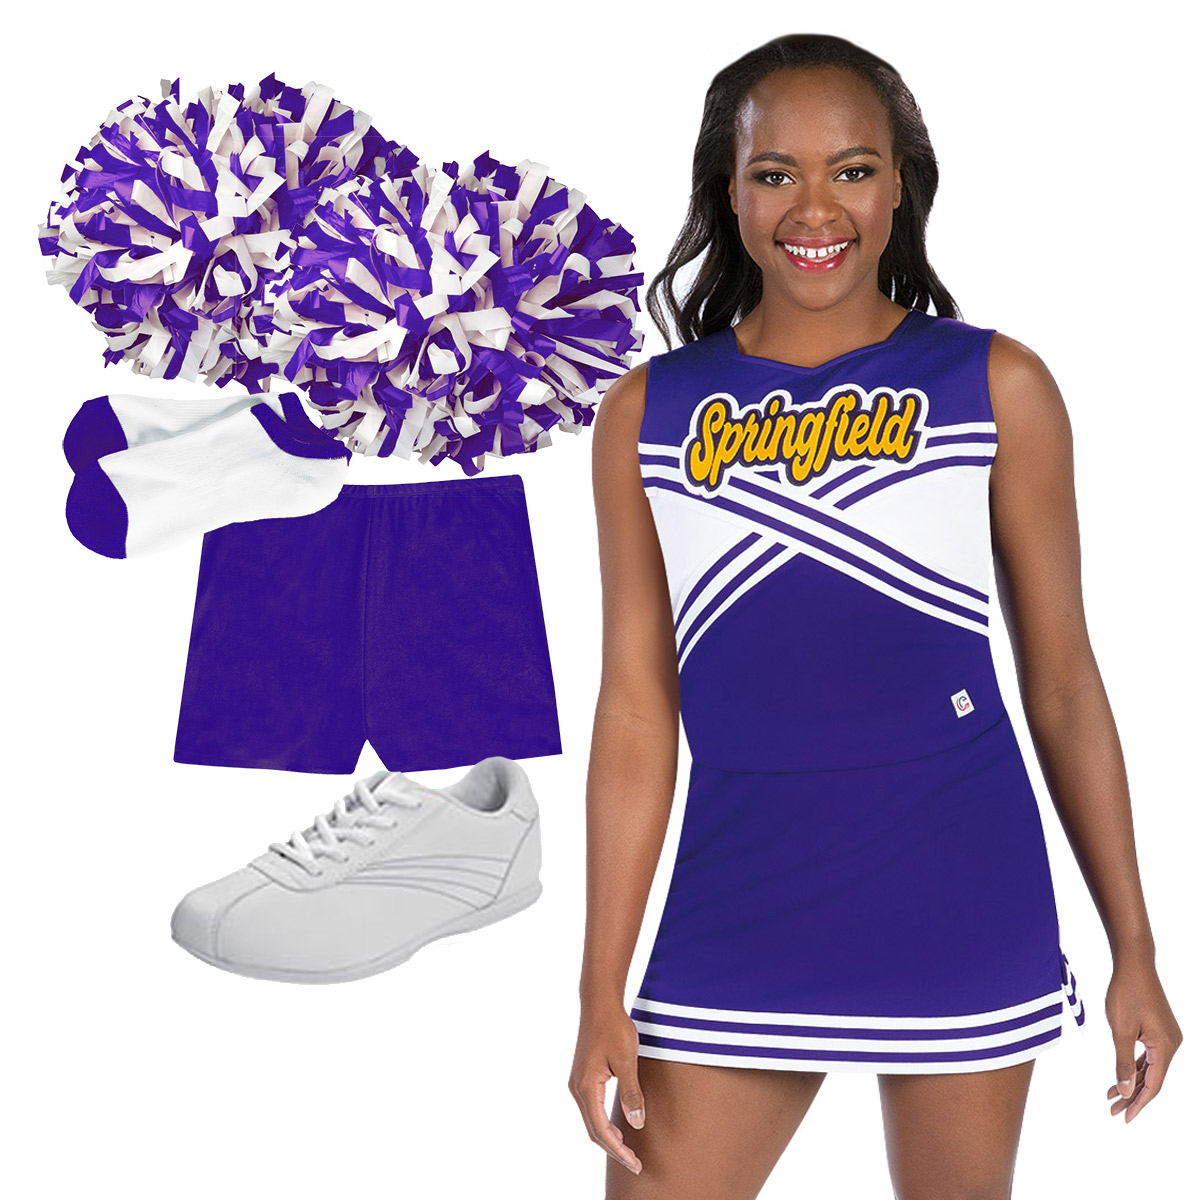 Poms, High-quality cheerleading uniforms, cheer shoes, cheer bows, cheer  accessories, and more